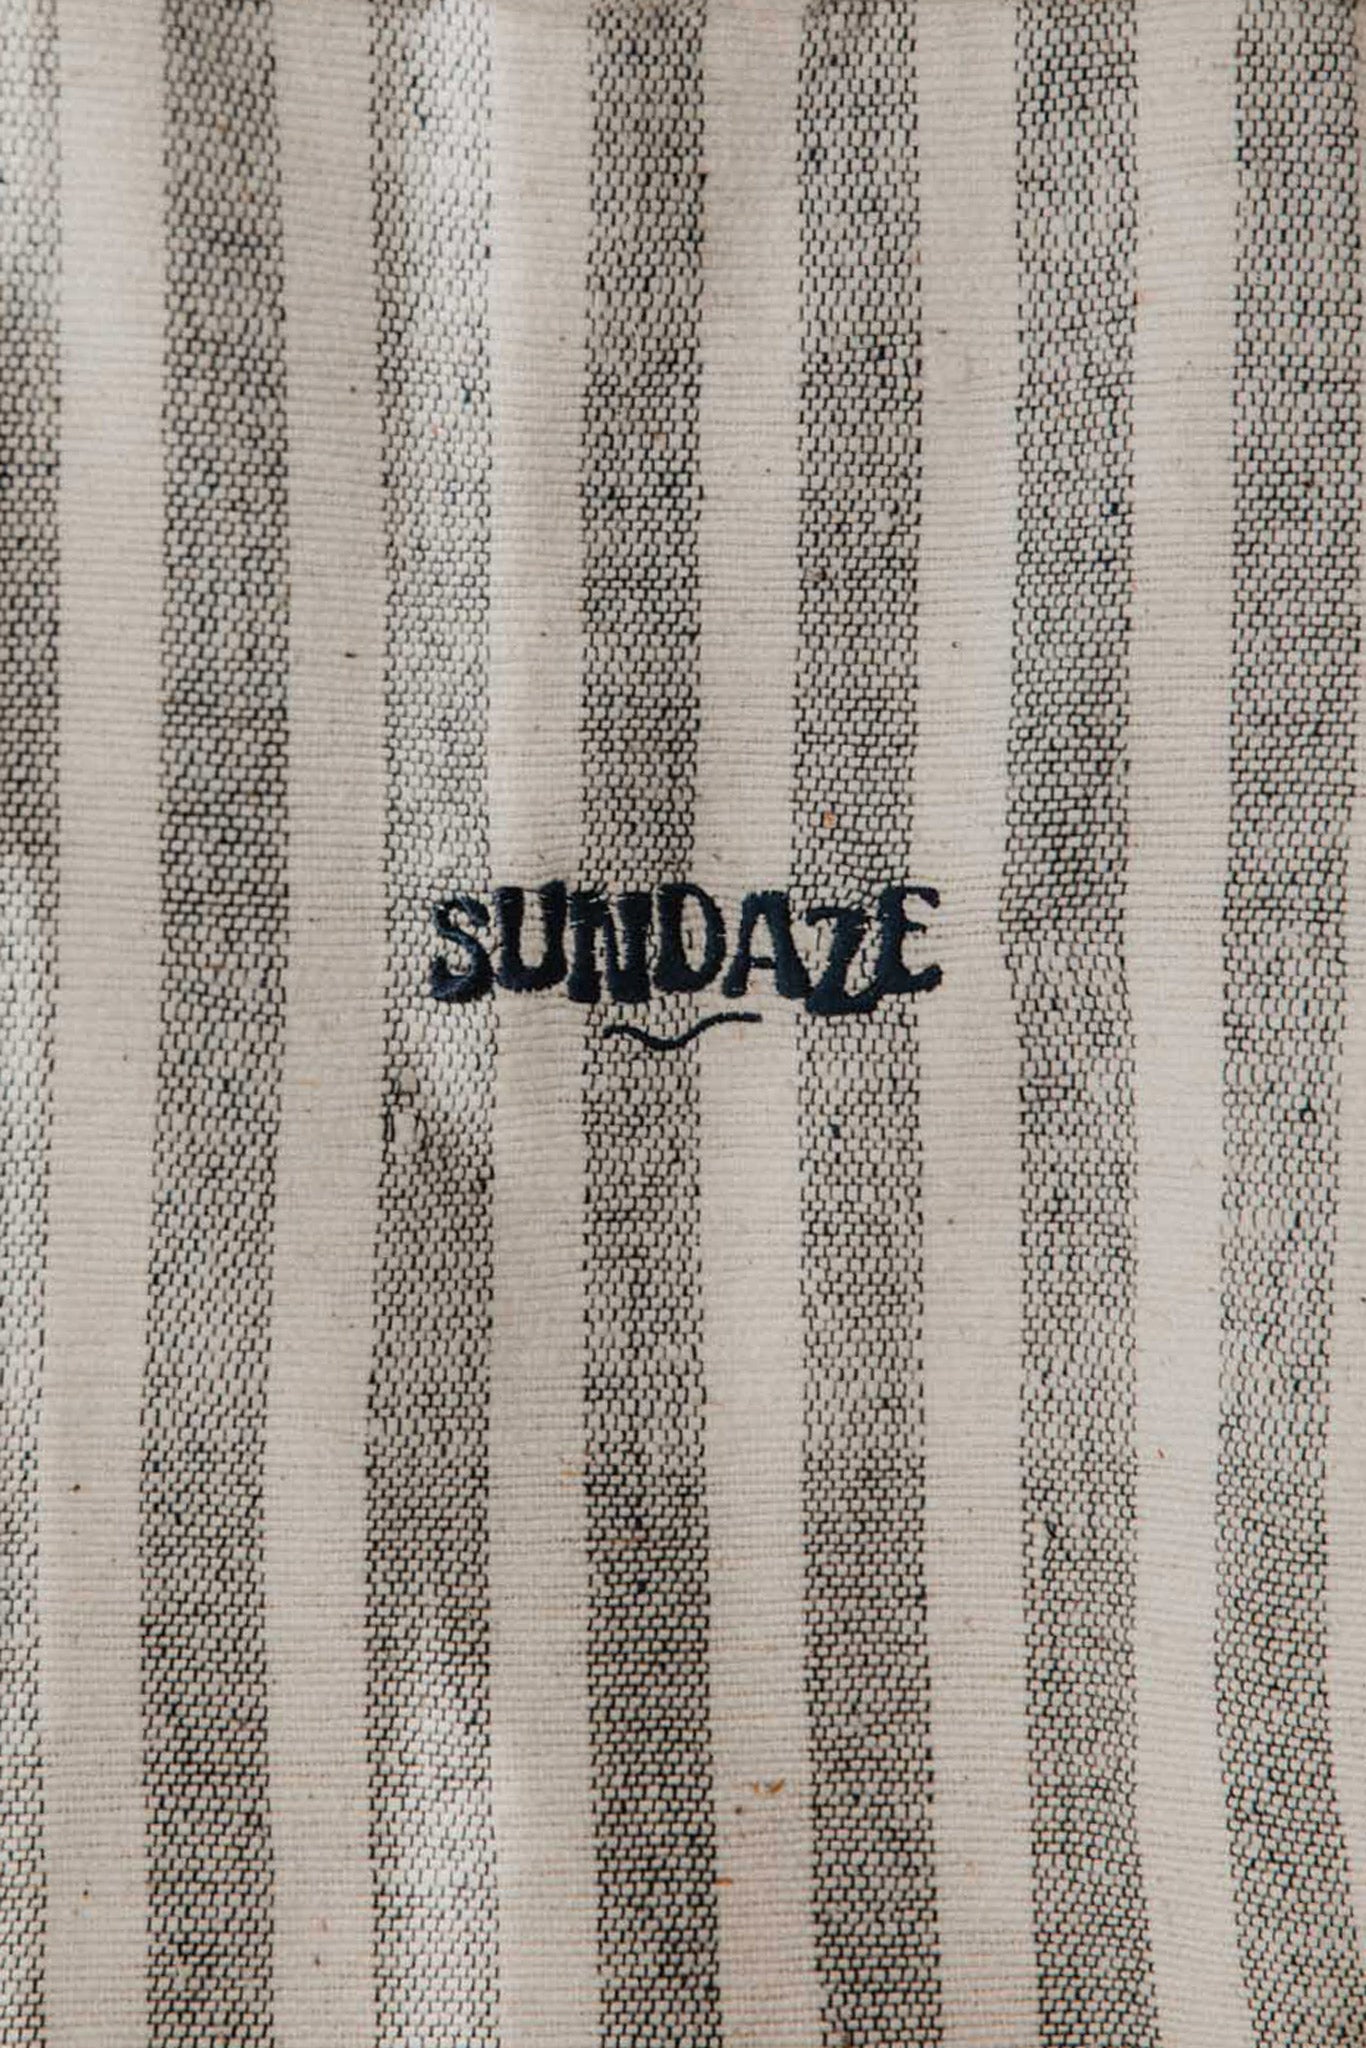 Close-up photo of the striped Chapter One Tote Bag with embroidered SunDaze logo